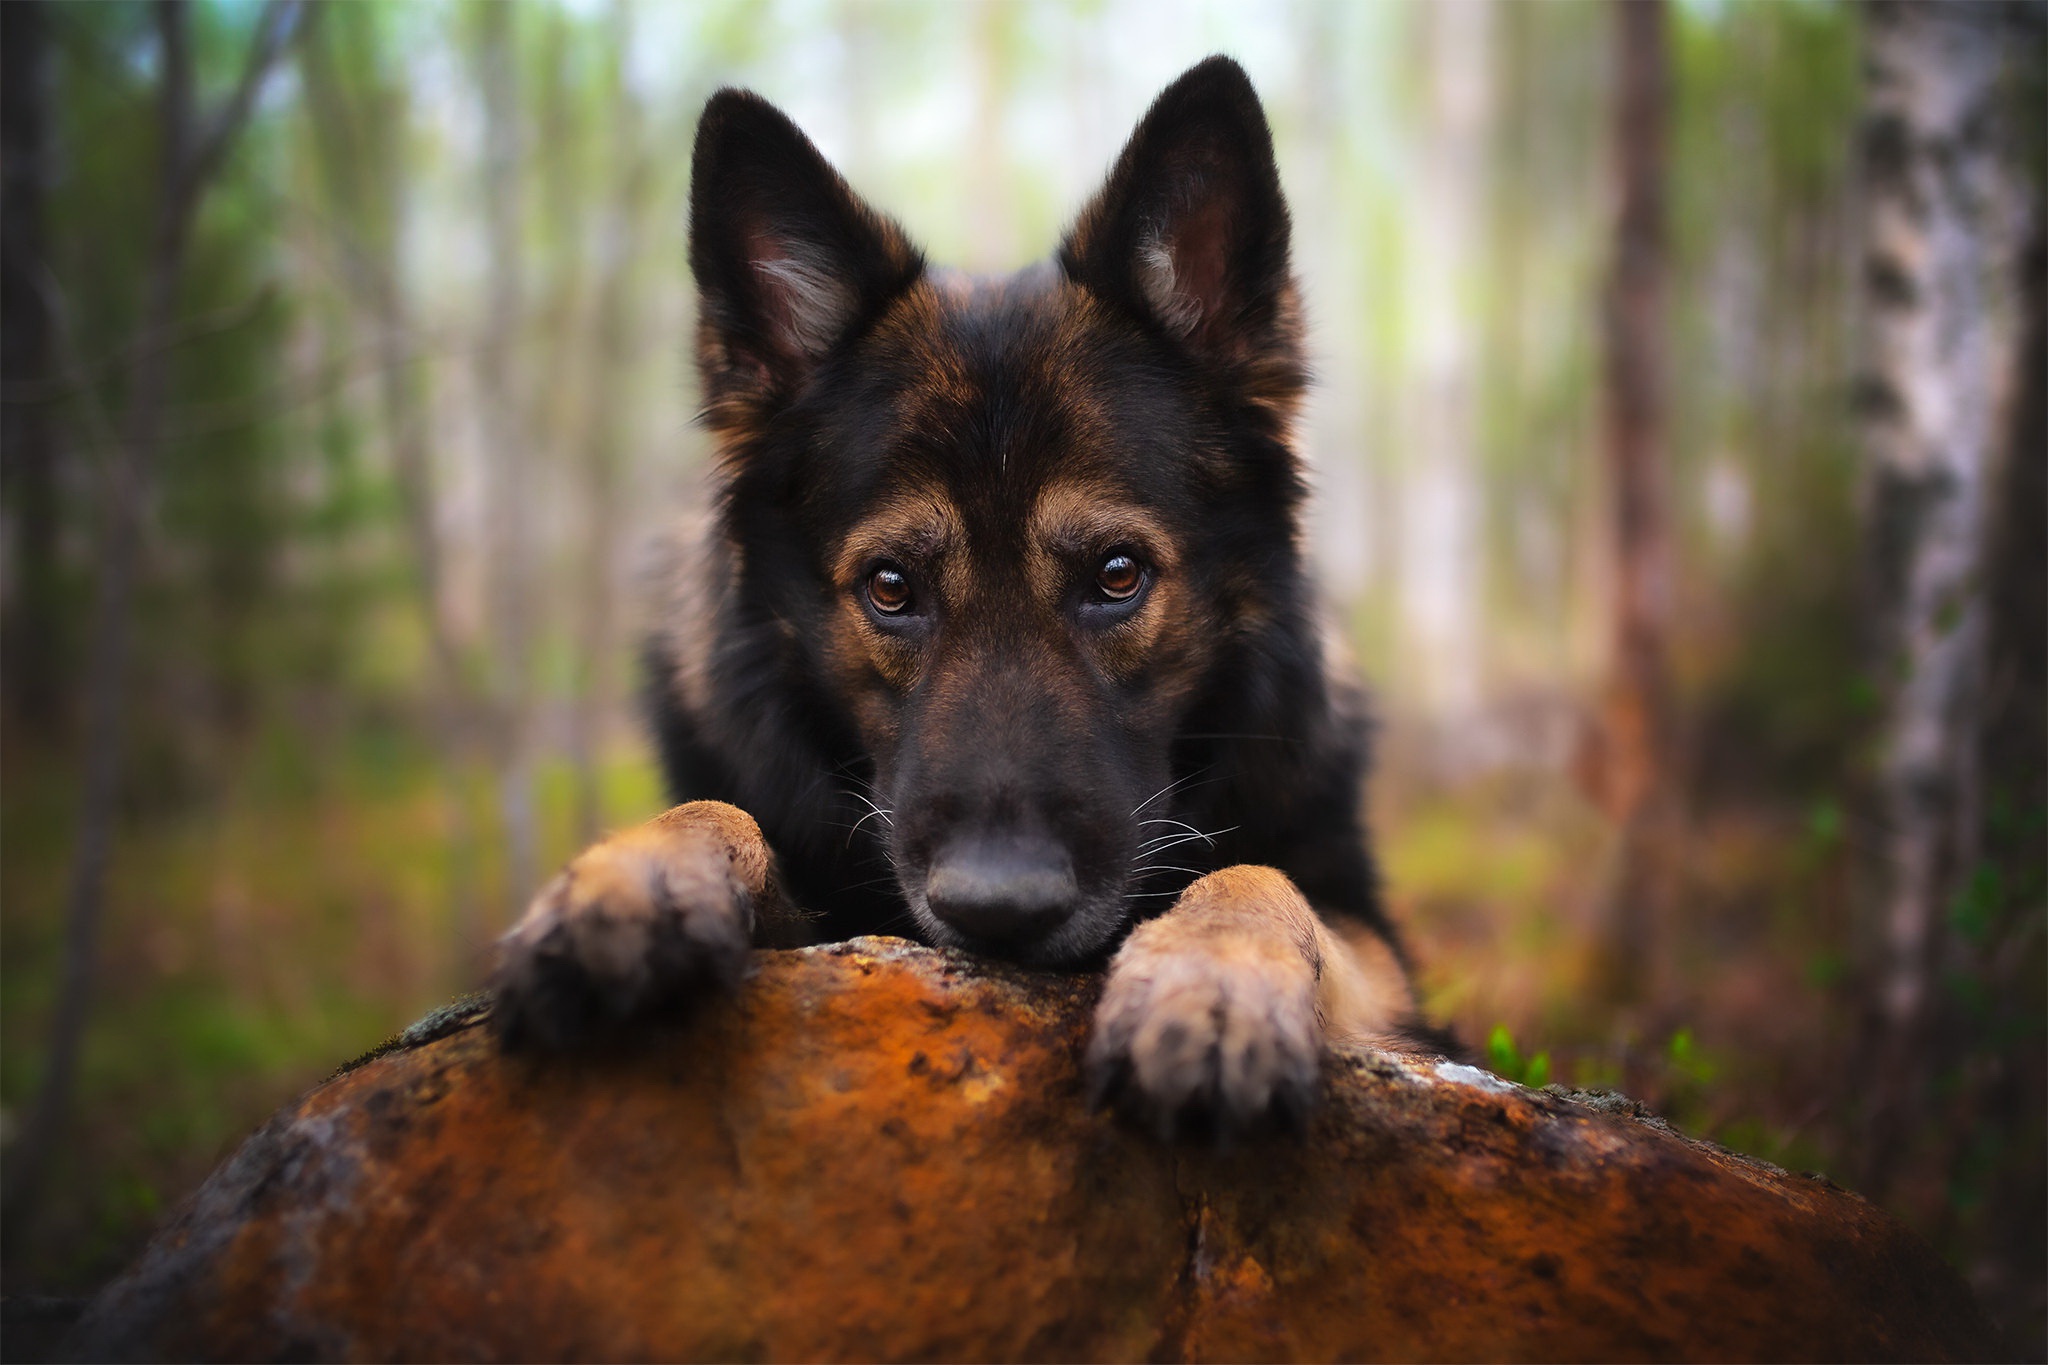 Mobile wallpaper: Dogs, Dog, Animal, German Shepherd, Depth Of Field,  484261 download the picture for free.